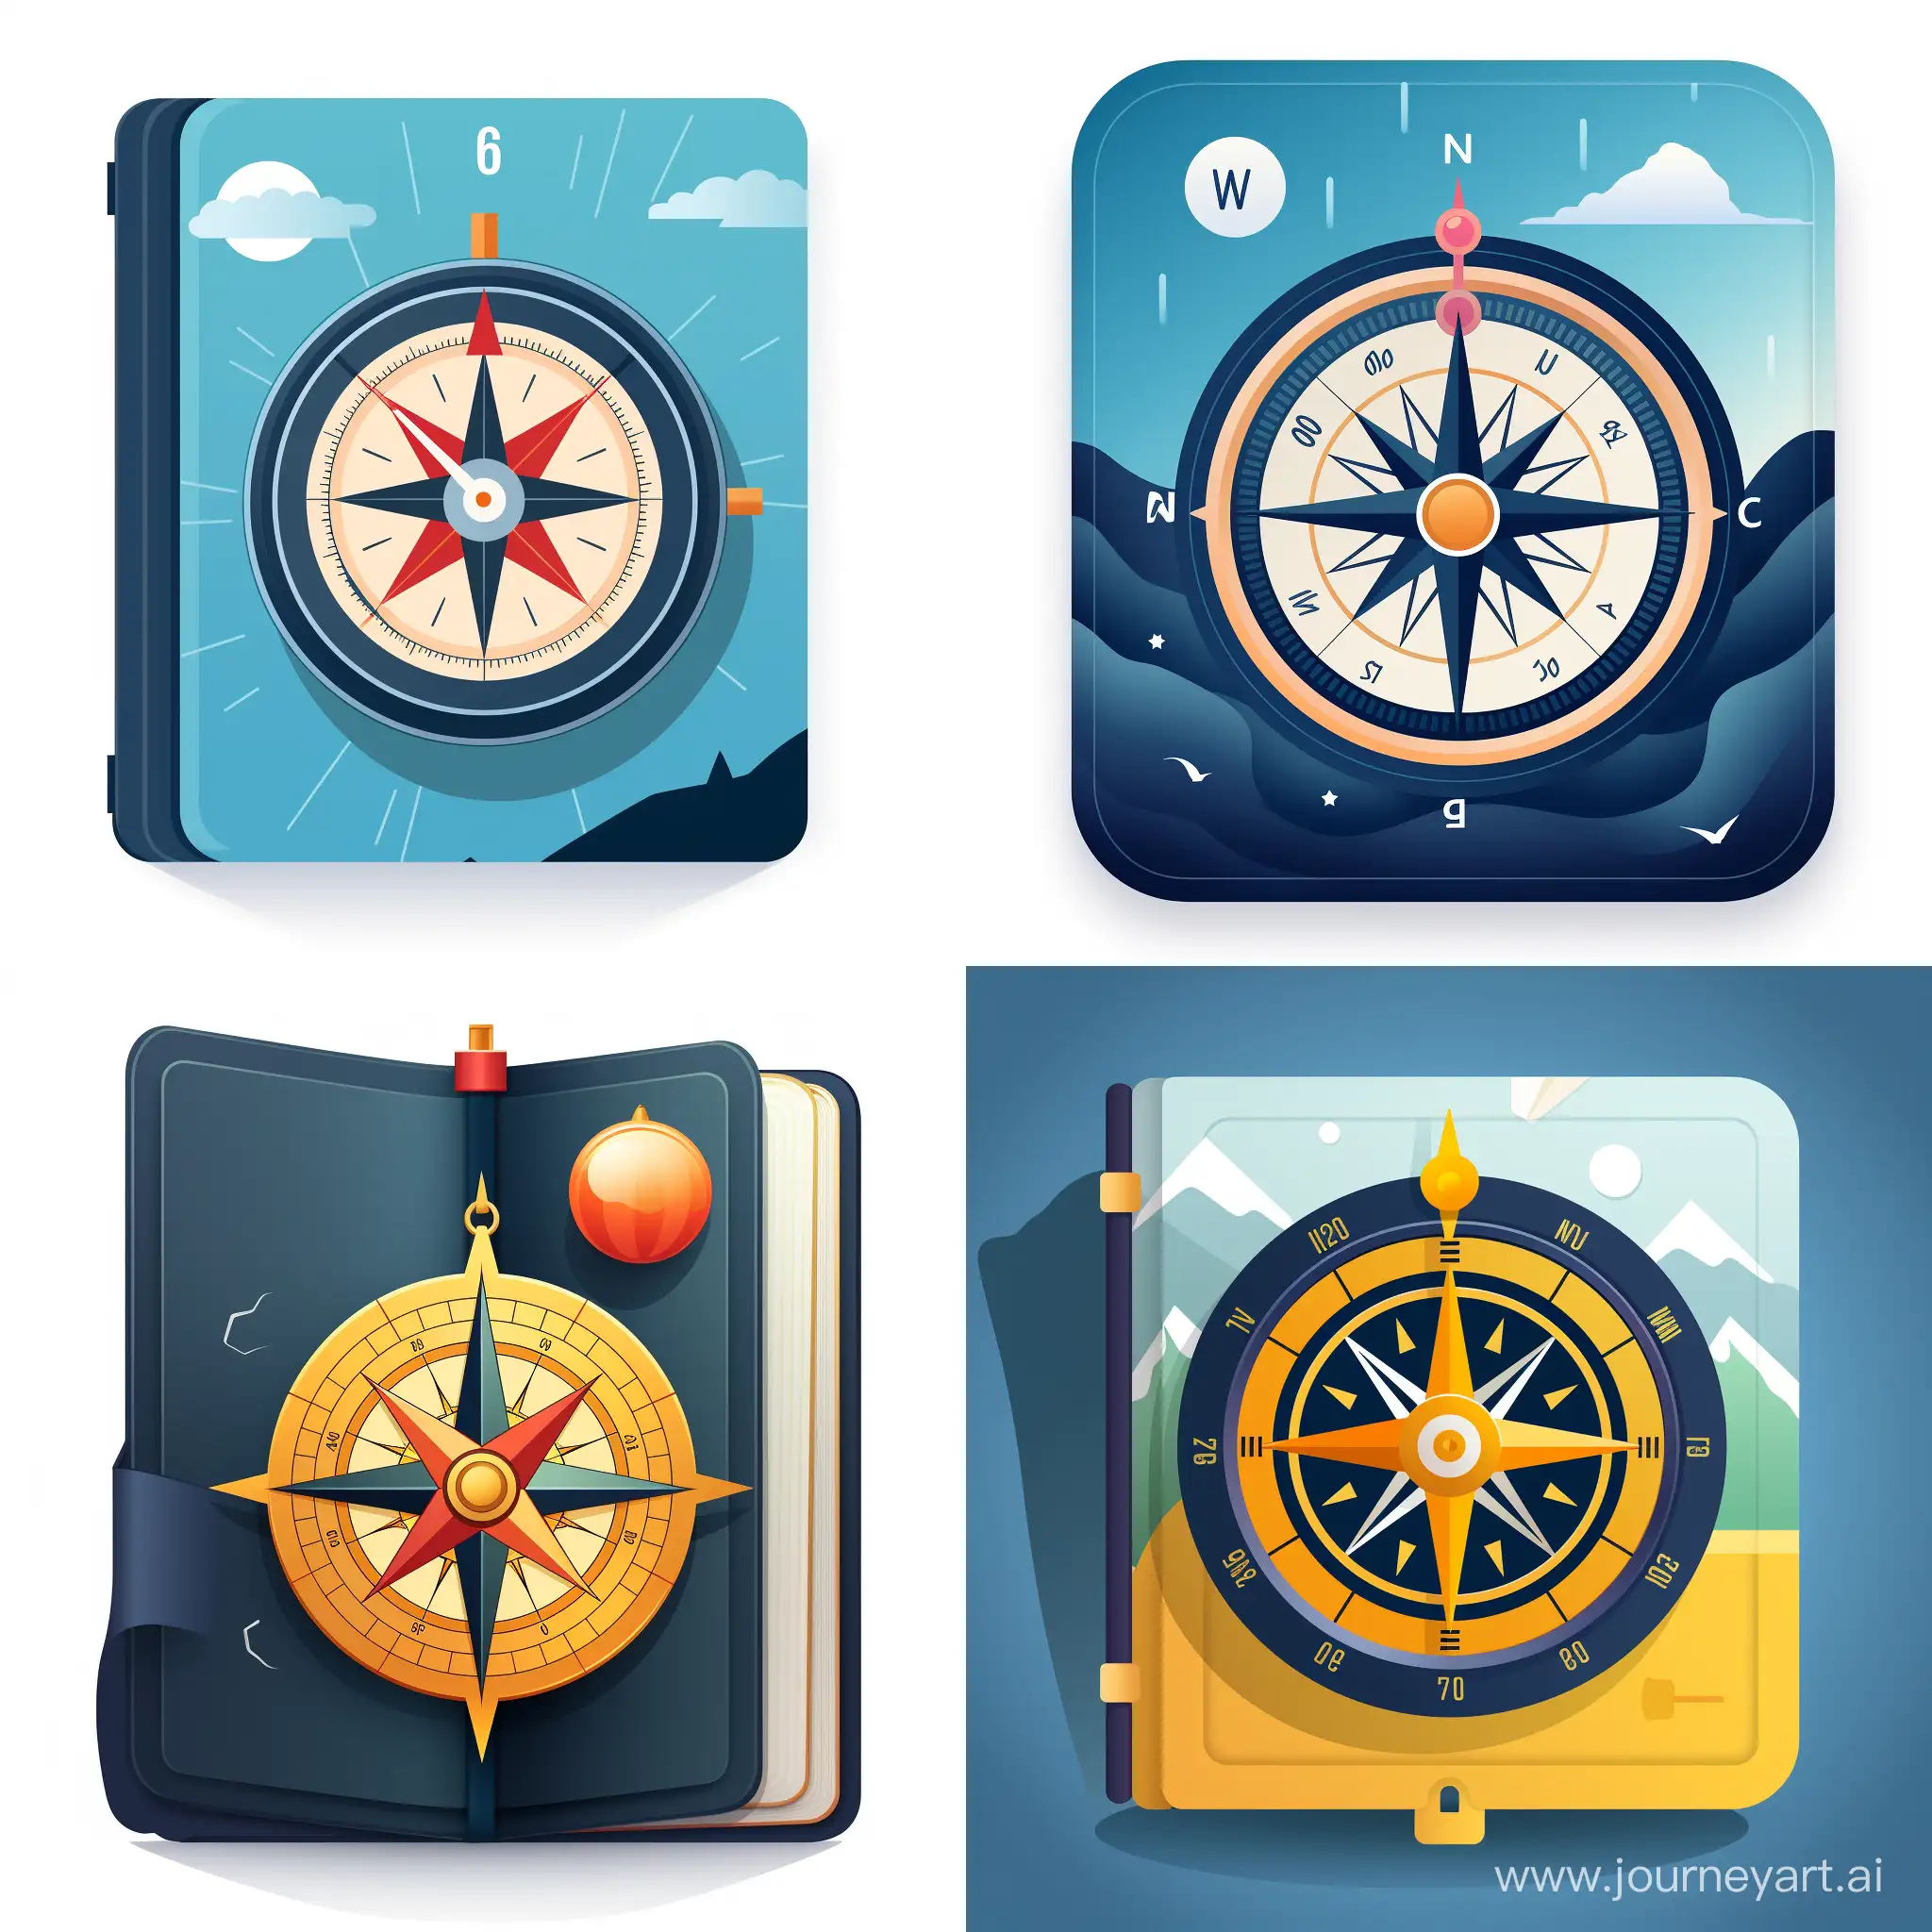 Design a flat vector iOS app icon, squared with round edges, with a compass needle embedded within an open book. The compass needle symbolizes navigation, guidance, and precision in stock picks, while the open book represents the wealth of knowledge and learning available through InvestingKraft.